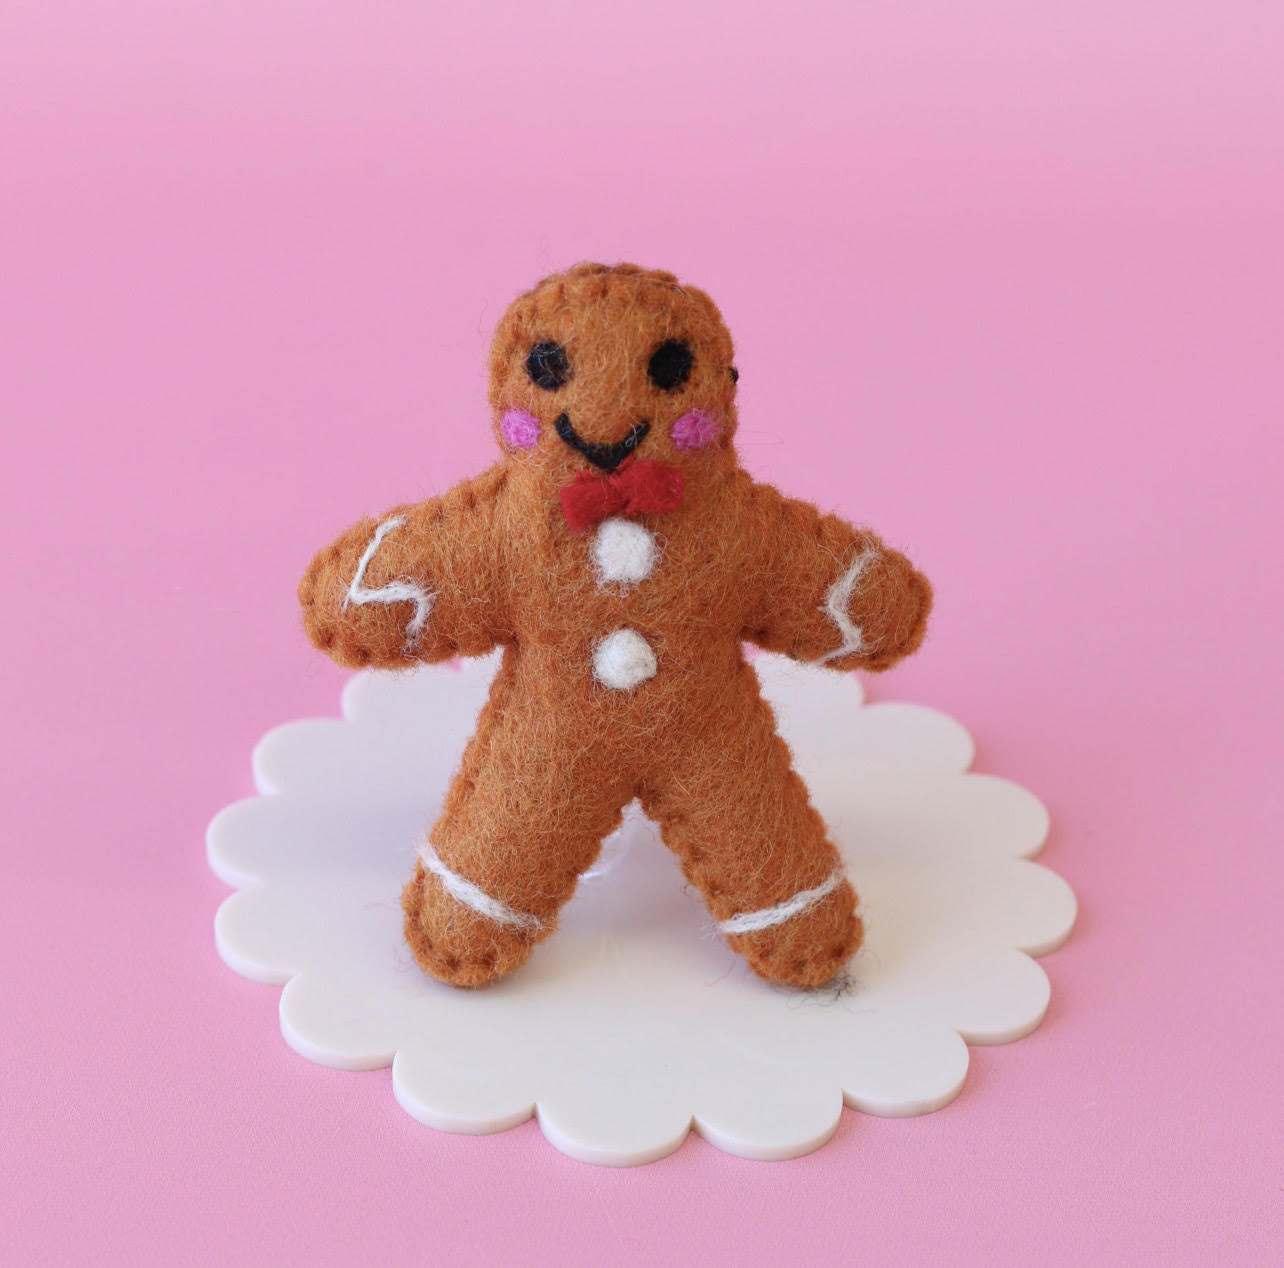 Fred the Gingerbread kid